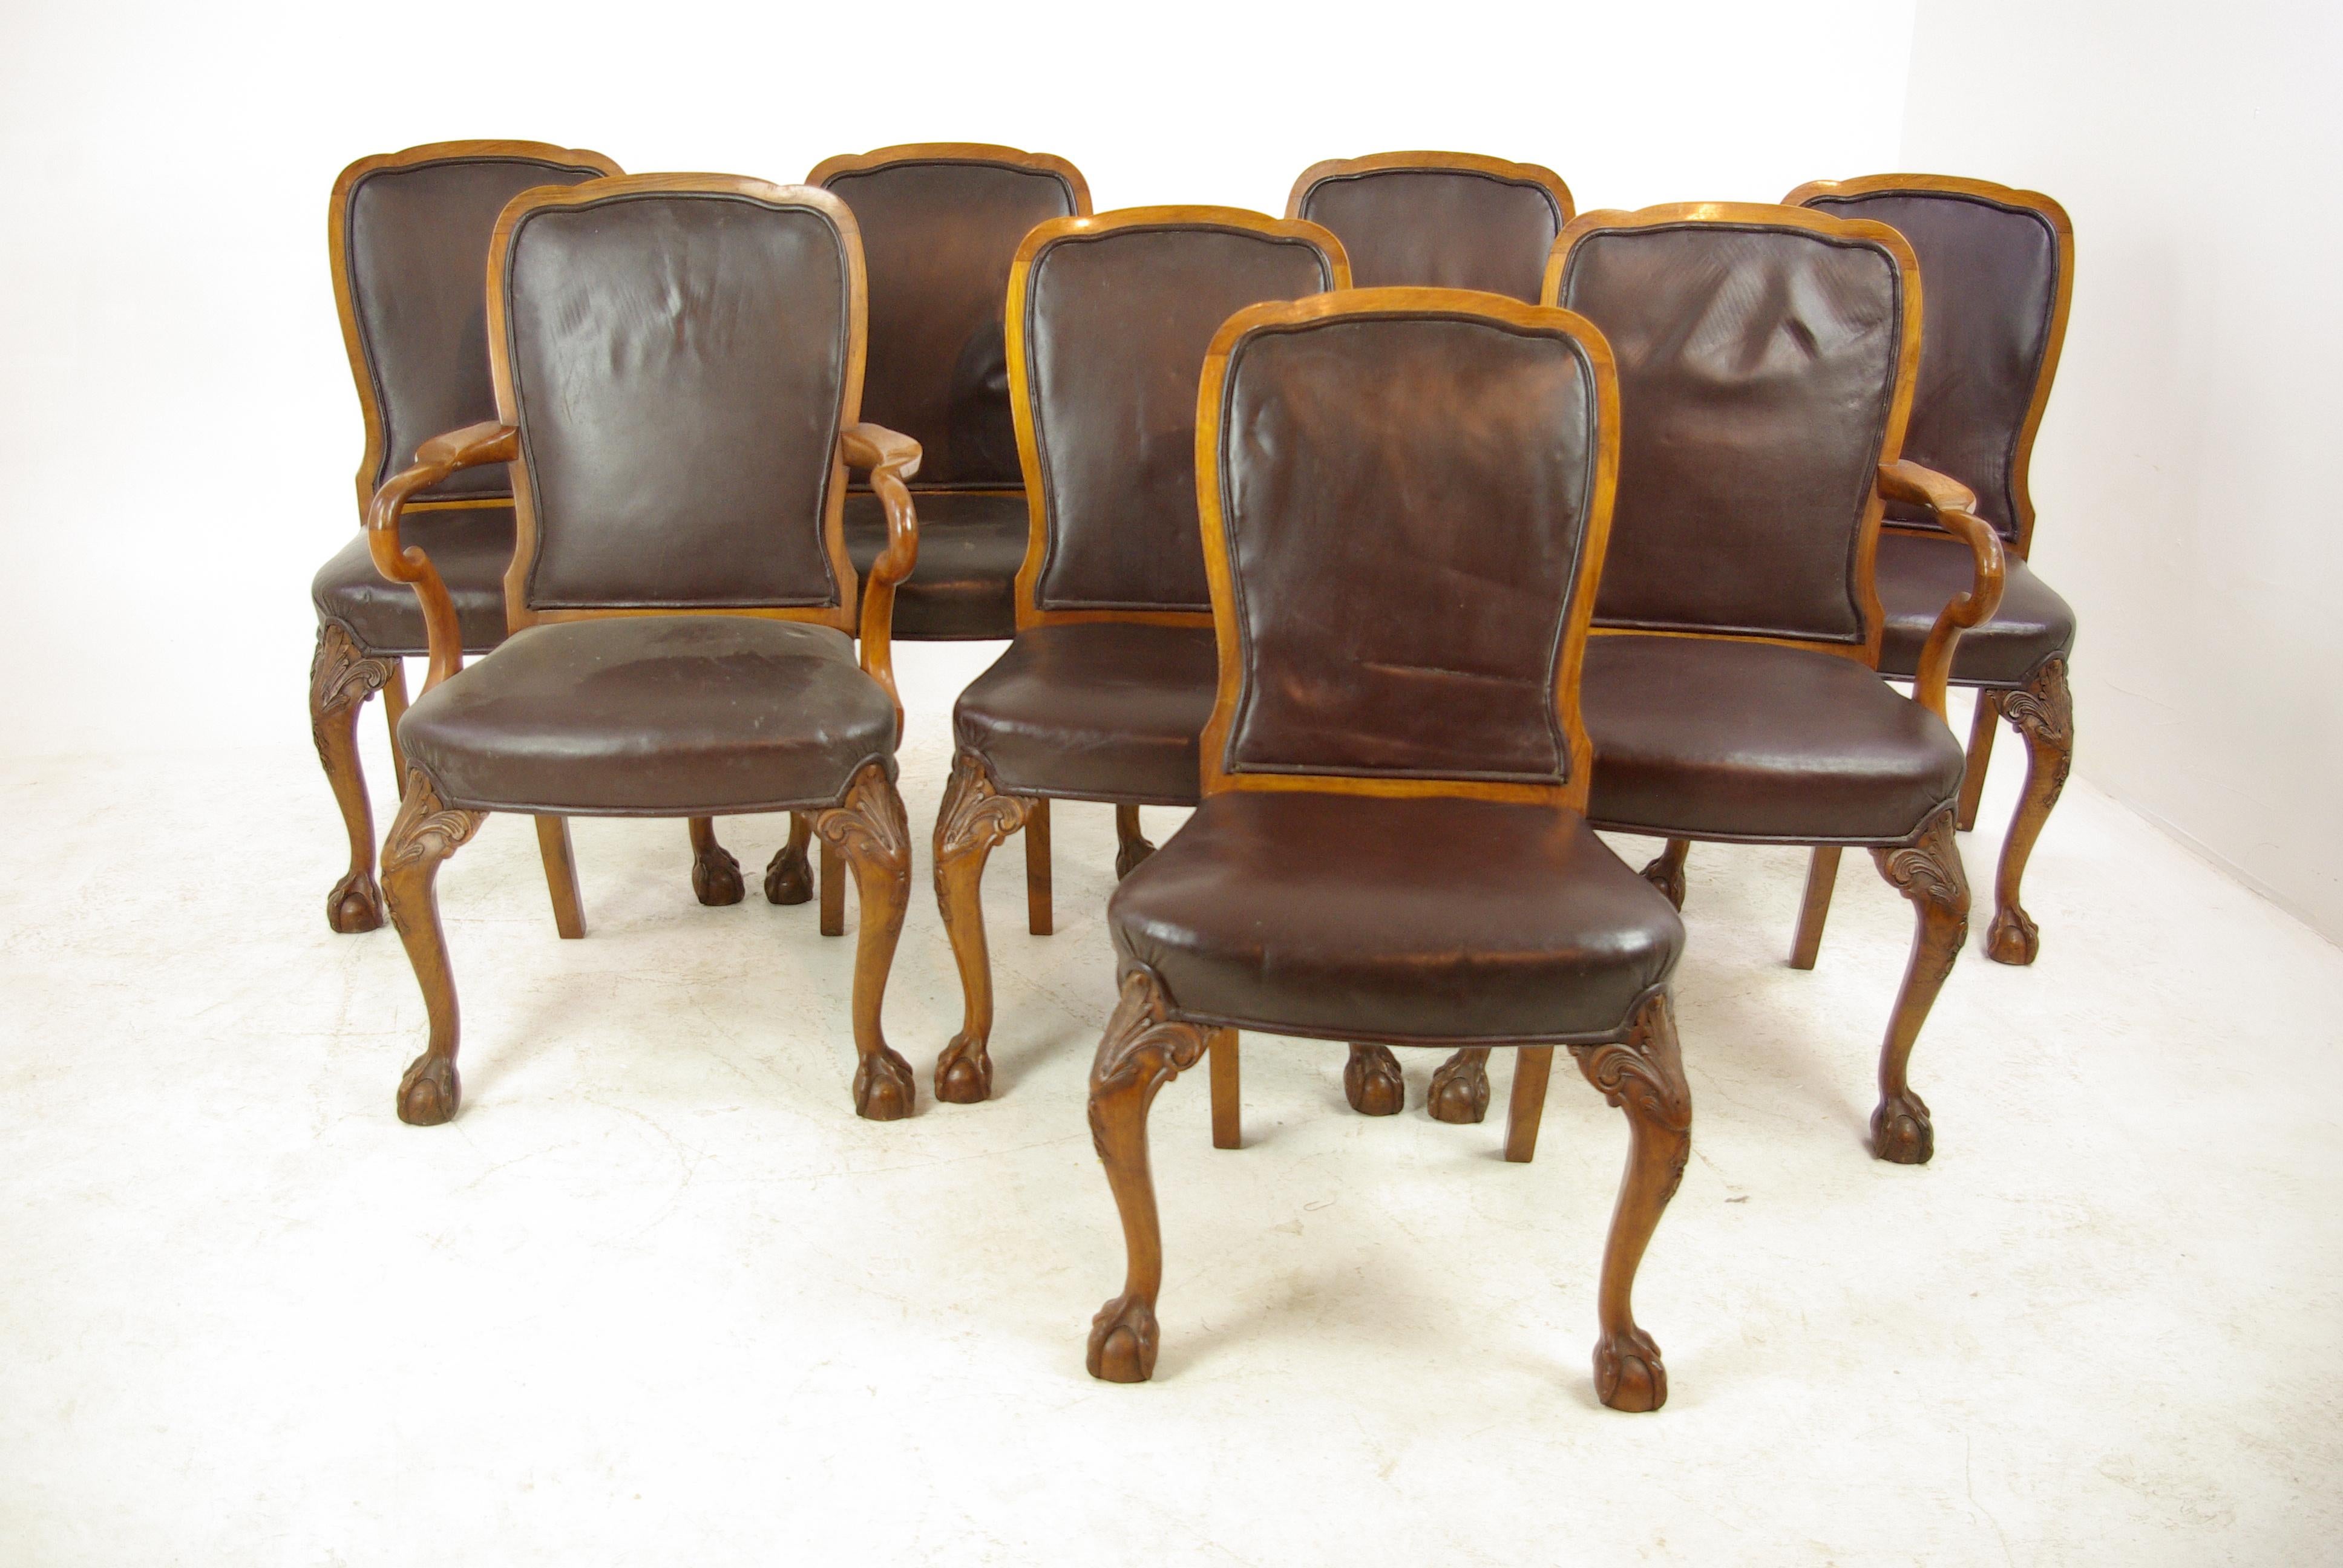 Antique dining chairs, walnut, leather seats, Scotland 1930, Antique Furniture, B1348

Scotland, 1930
Solid walnut with original finish
Shaped back with leather insert,
Upholstered bow front leather seat
Carved knees ending on ball and claw